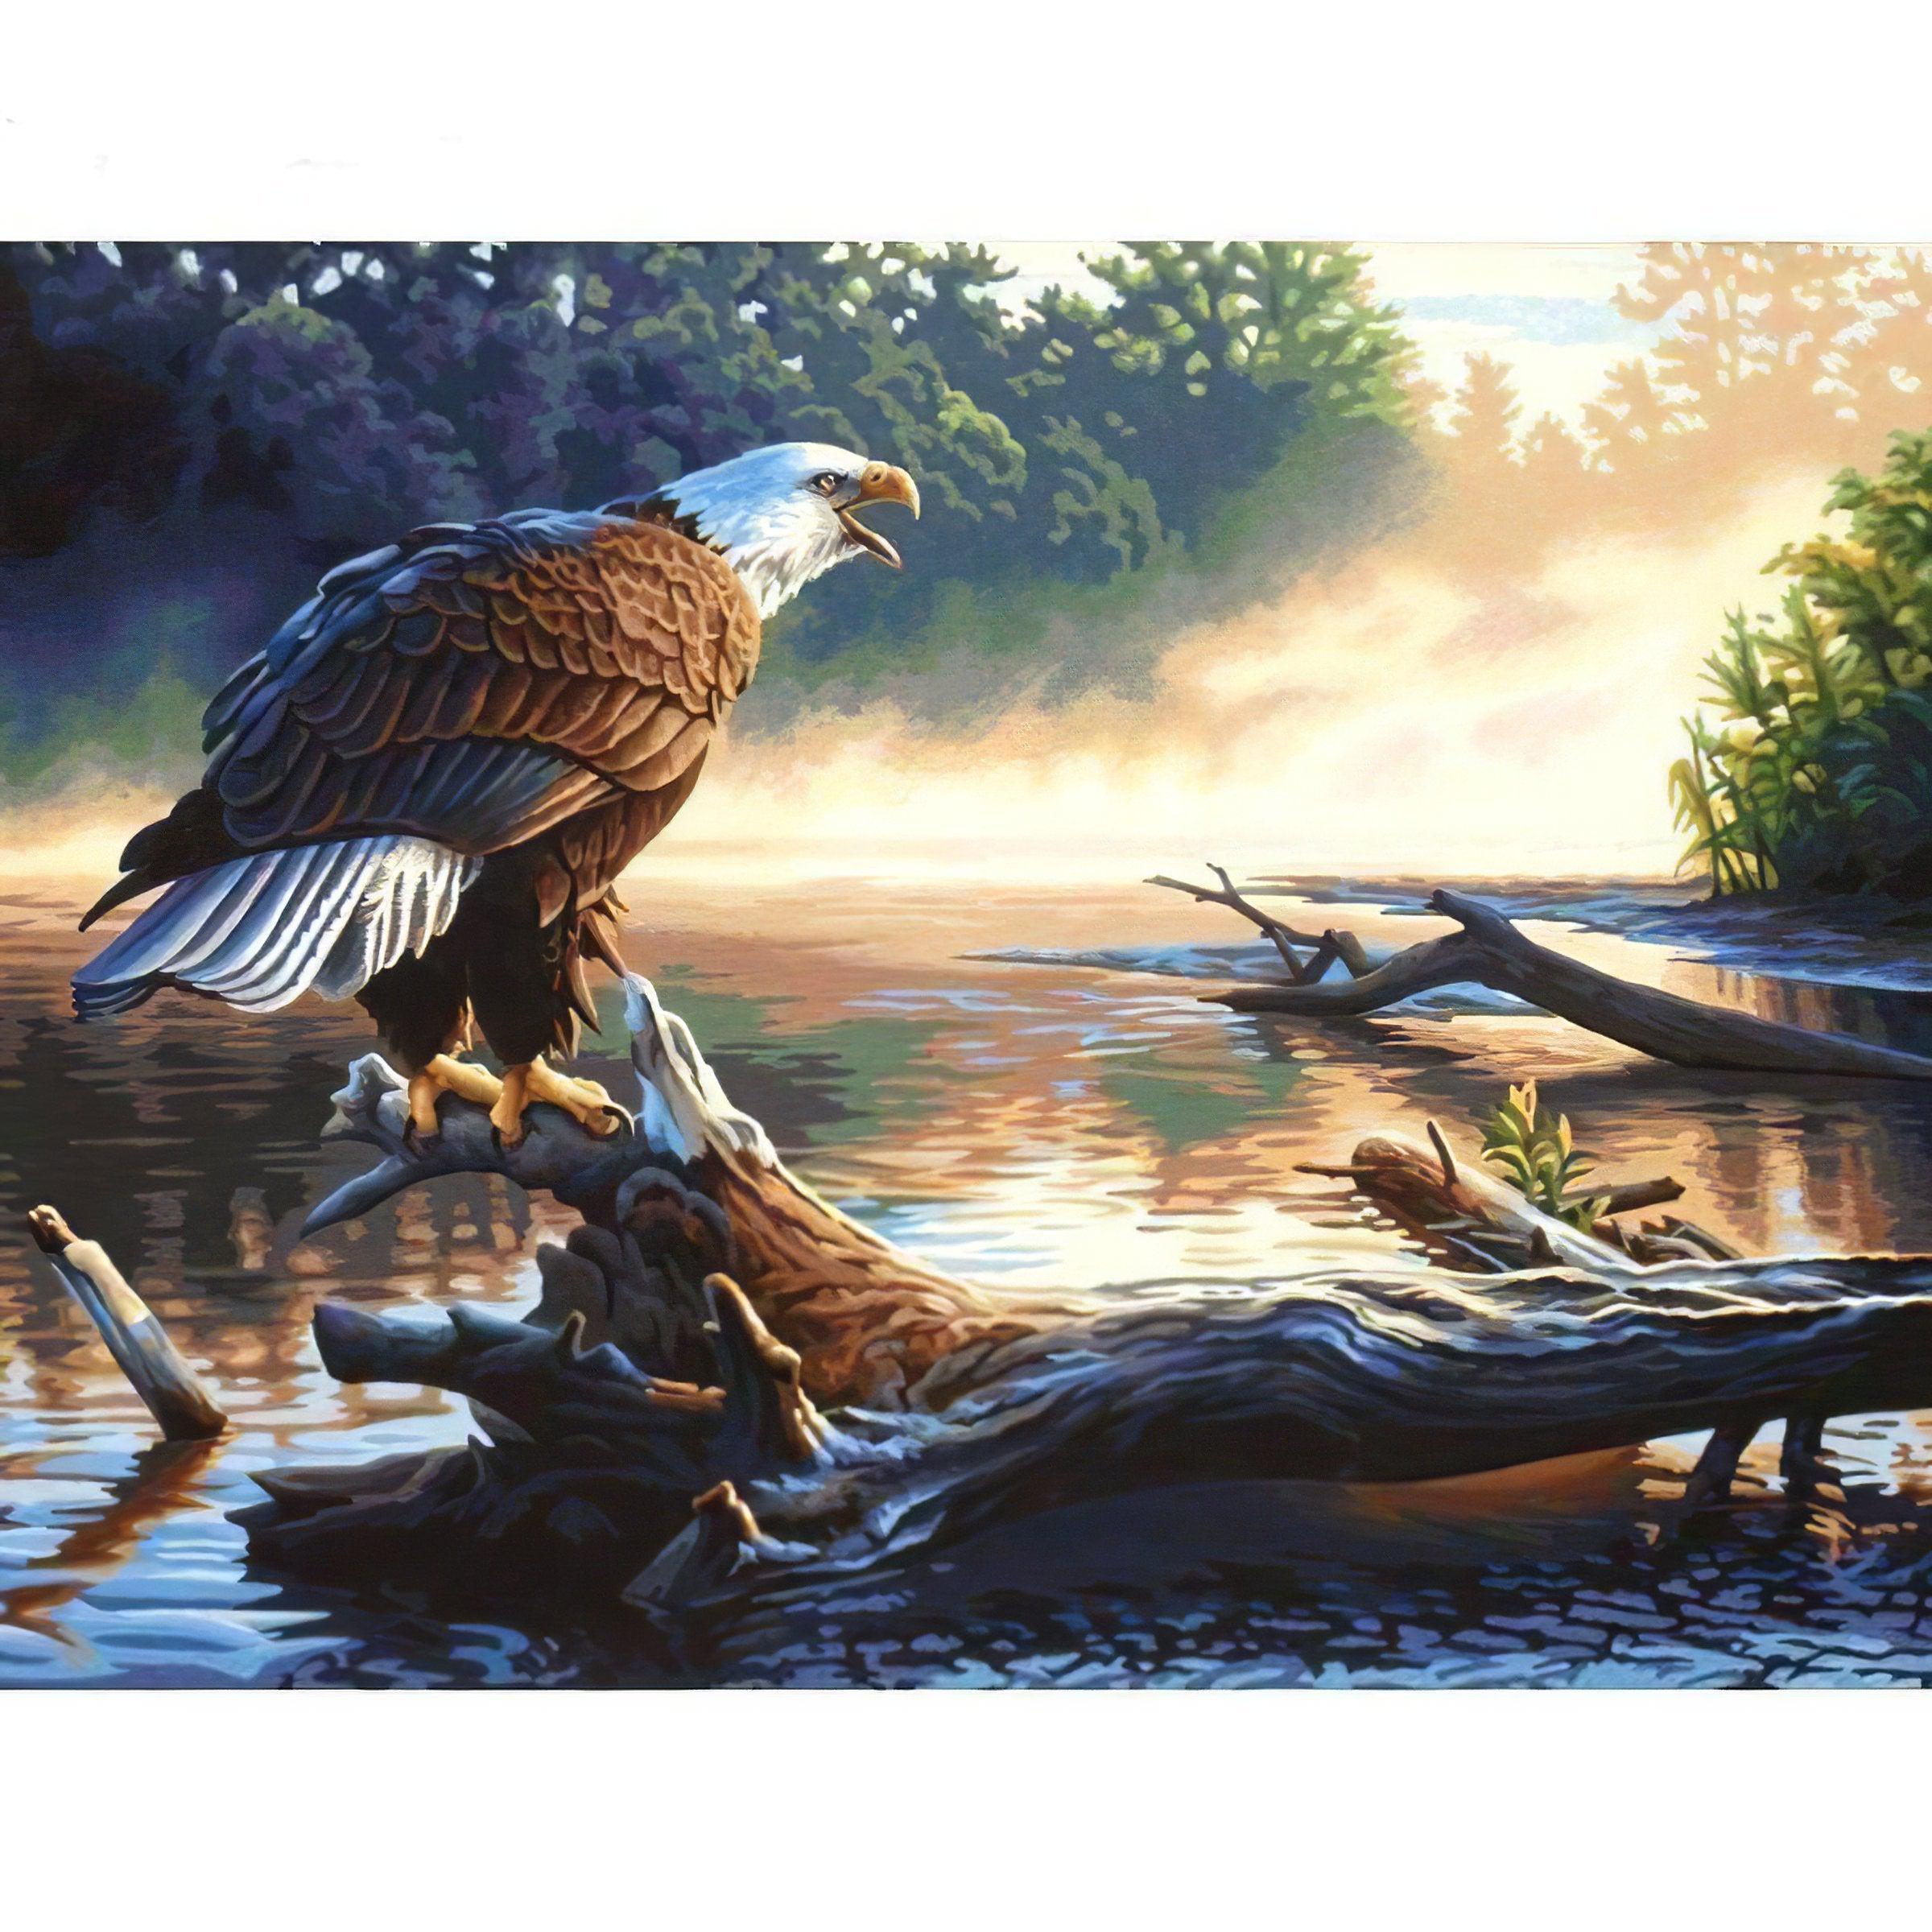 Embrace majesty with Eagle With White Head art.Eagle With White Head - Diamondartlove